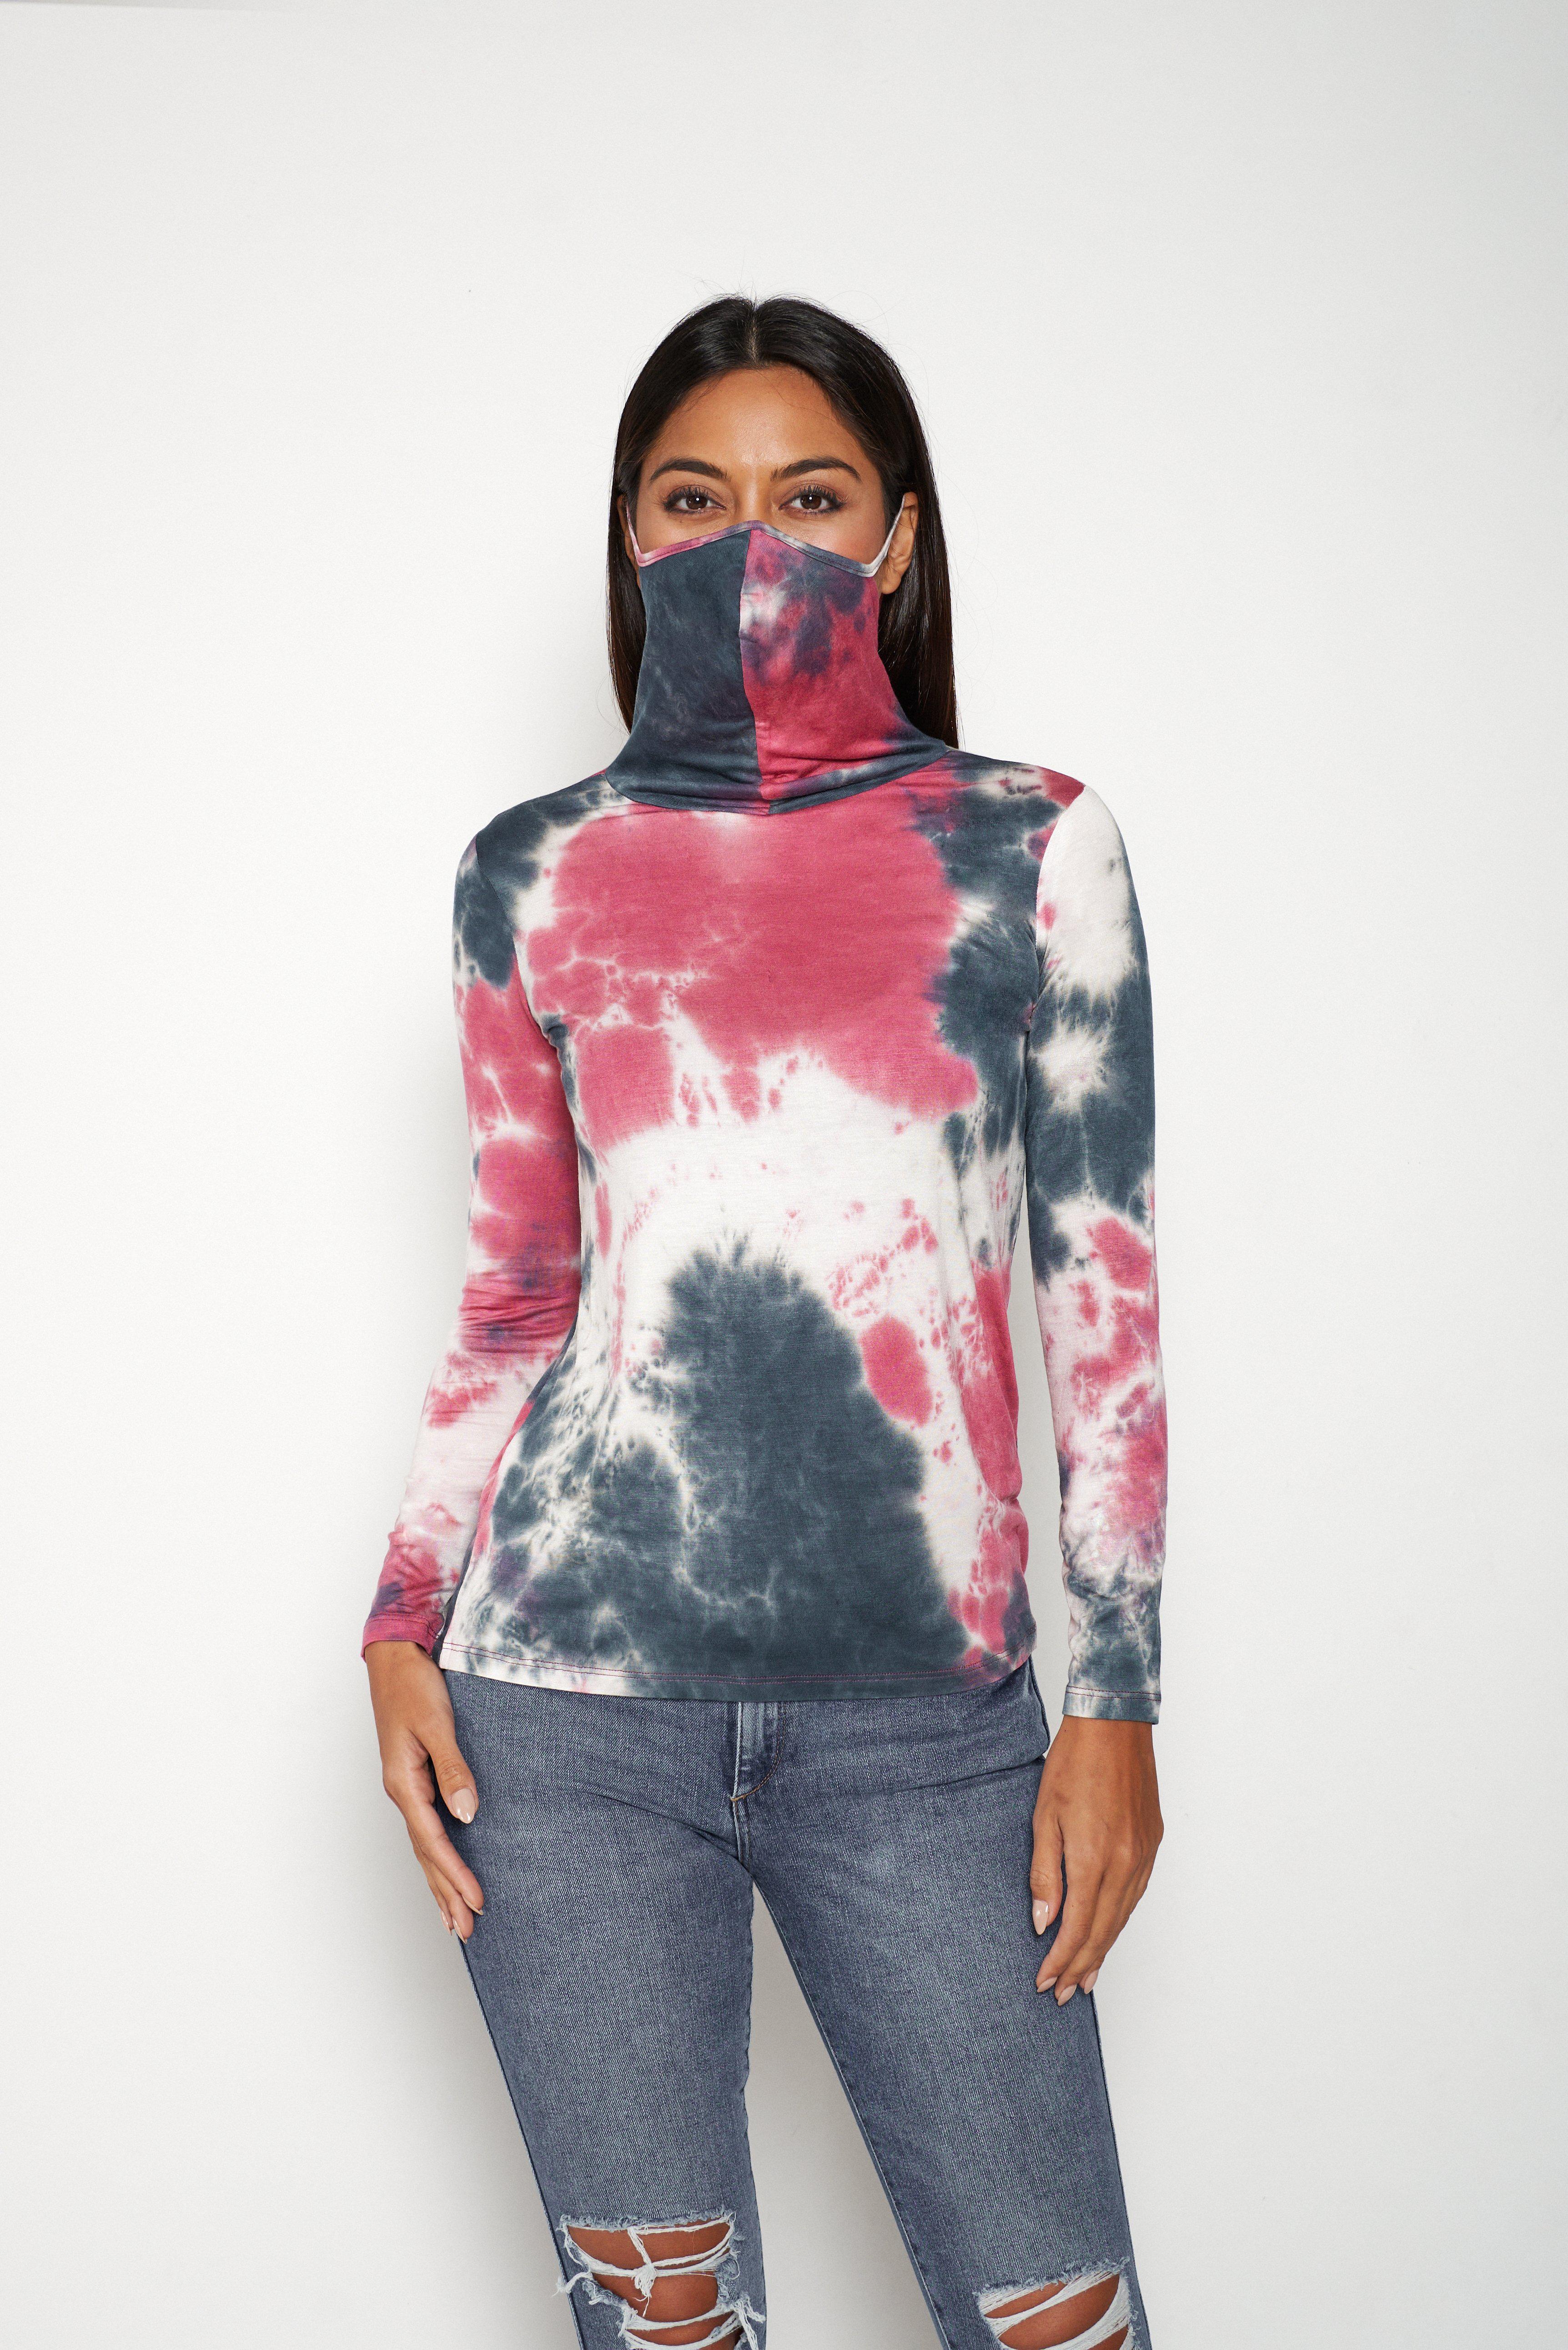 Adult Long Sleeve Pink White Tie-dye #9 Shmask™ Earloop Face Mask for Kids and Adults